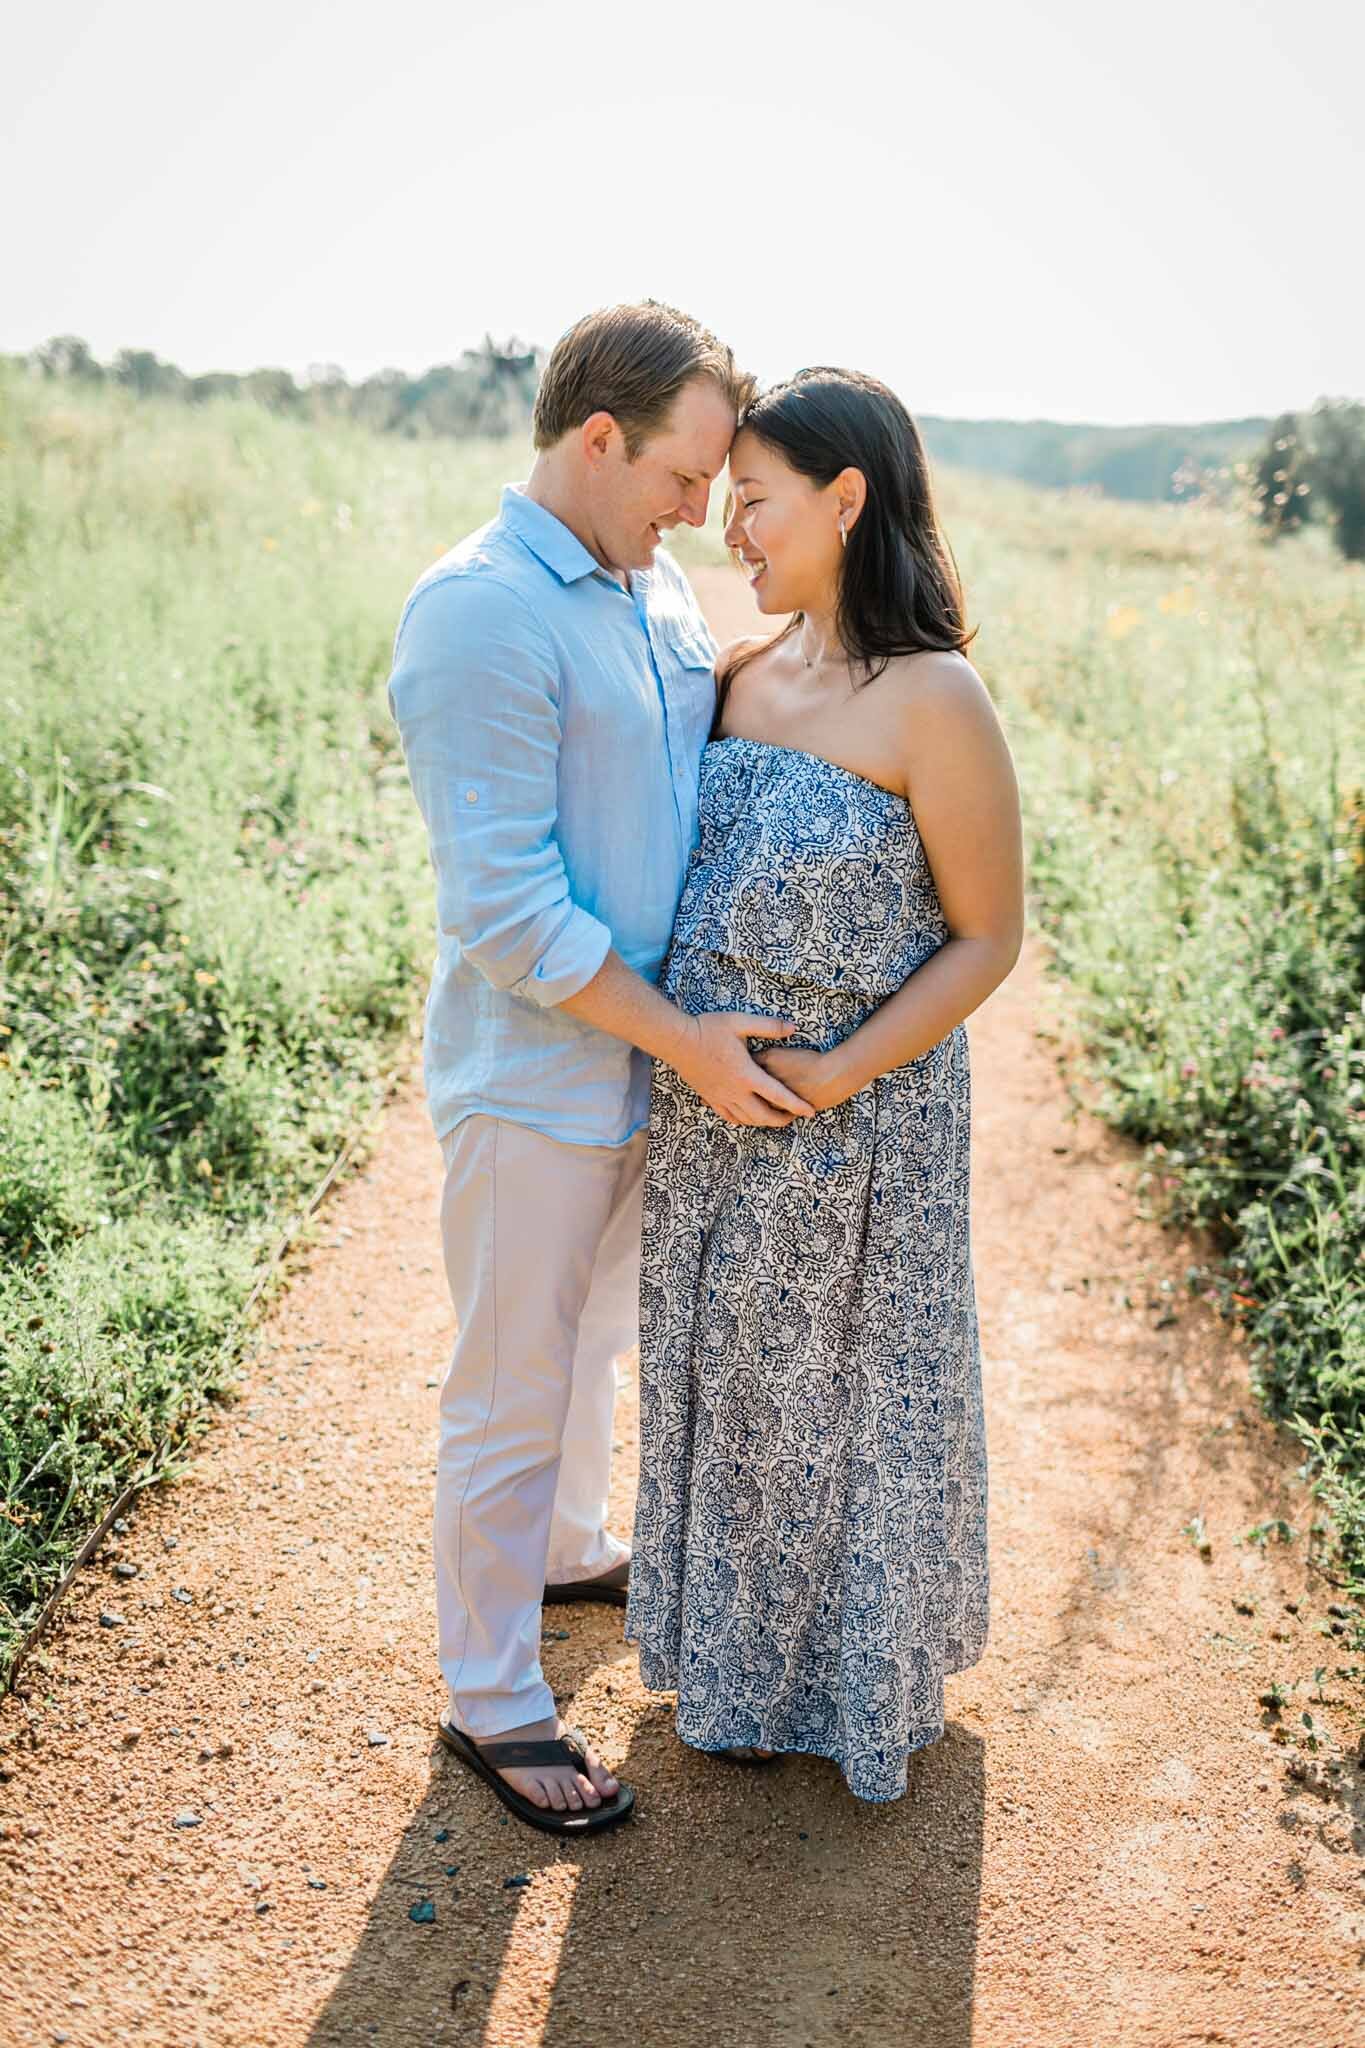 Raleigh Maternity Photographer | By G. Lin Photography | NCMA Maternity Photos | Bright summer photo of man and woman standing on pathway